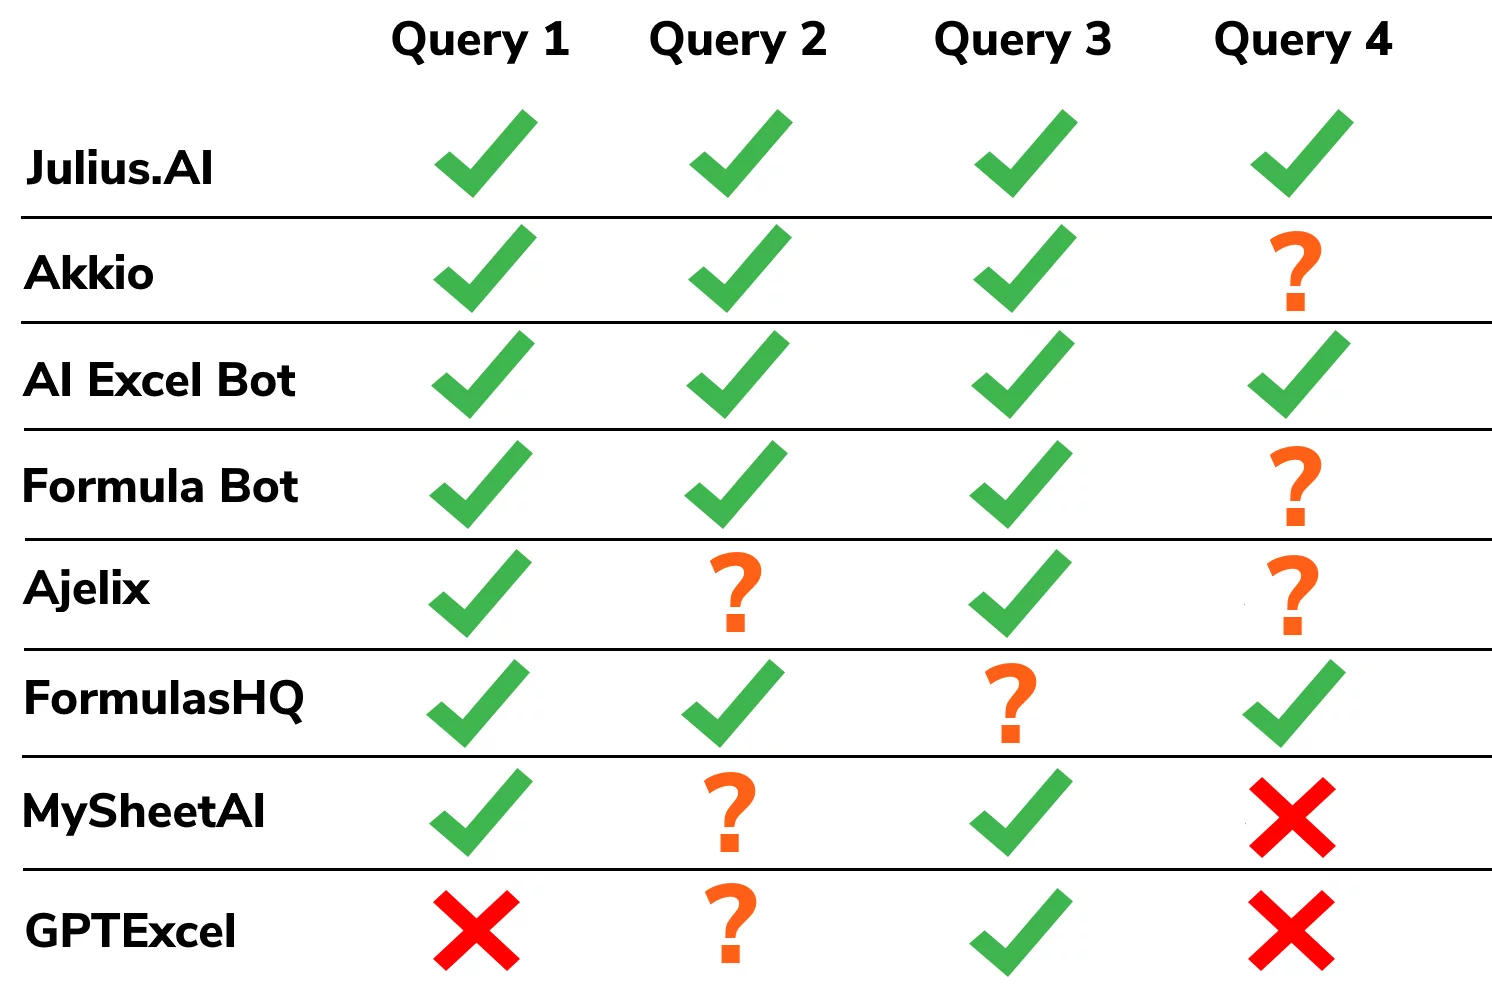 Table of results between Query and AI